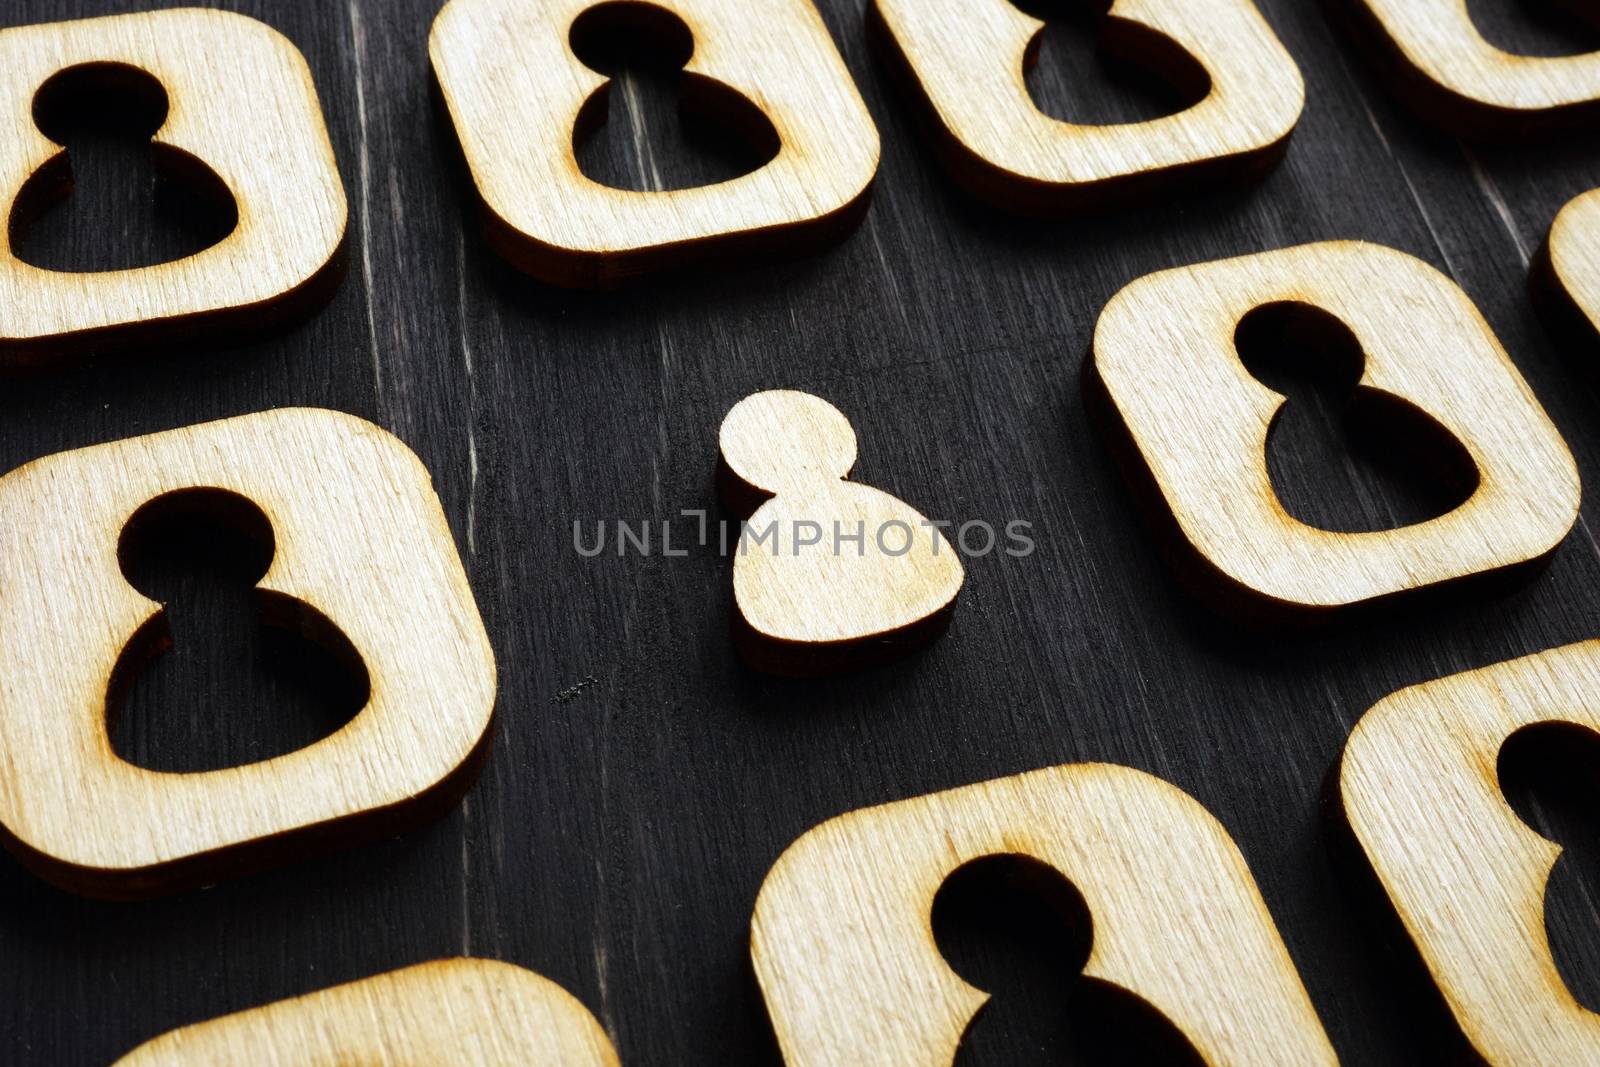 Unique stand out of the crowd. Wooden figures on the dark surface.